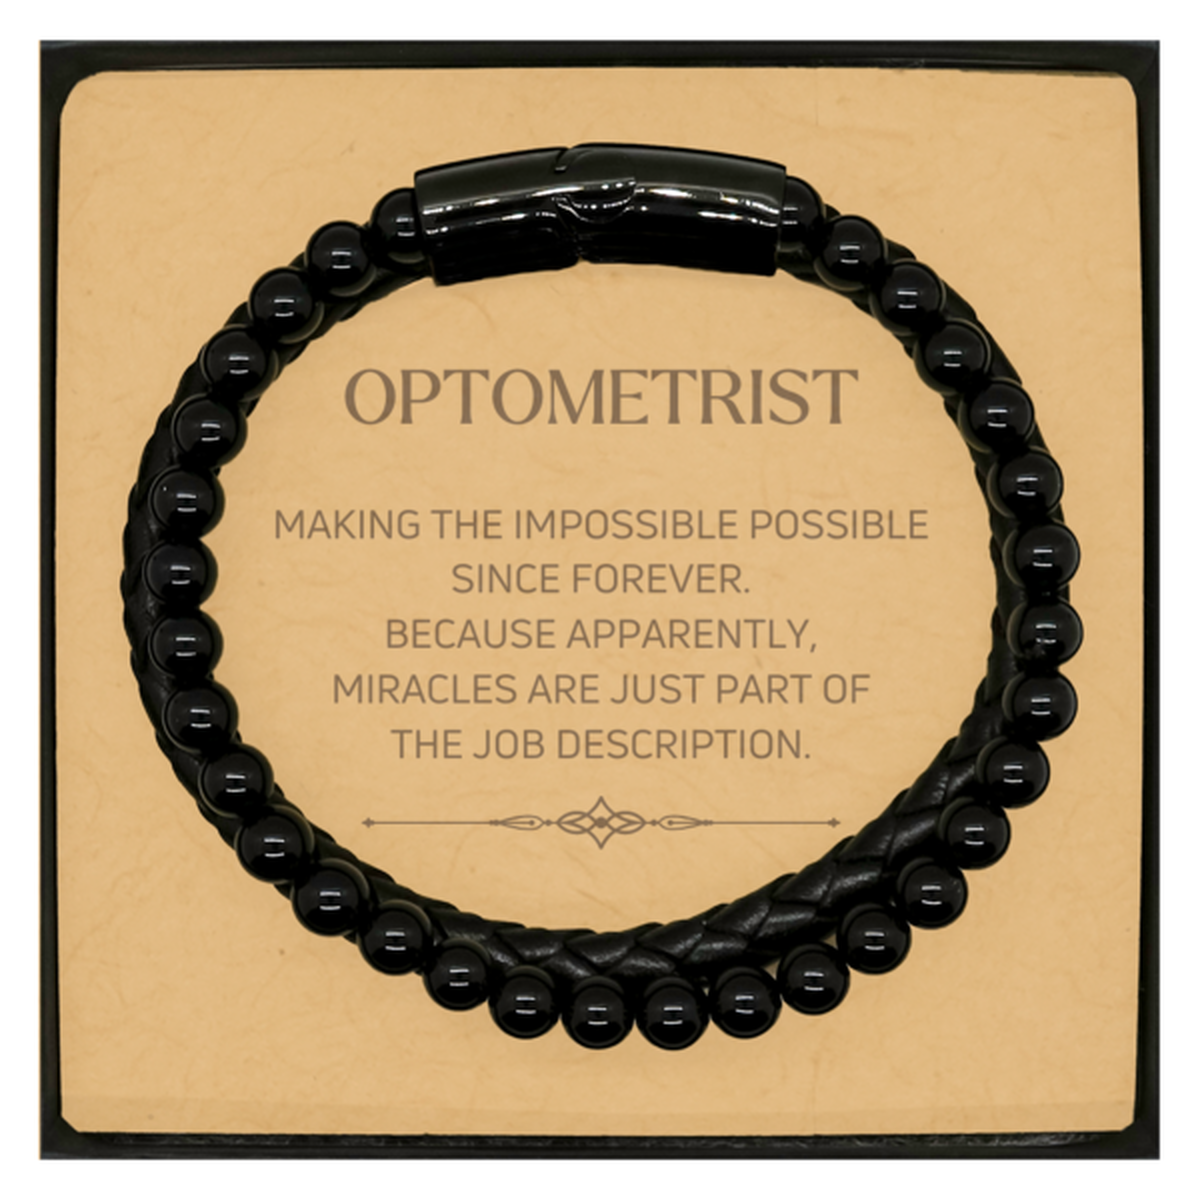 Funny Optometrist Gifts, Miracles are just part of the job description, Inspirational Birthday Christmas Stone Leather Bracelets For Optometrist, Men, Women, Coworkers, Friends, Boss